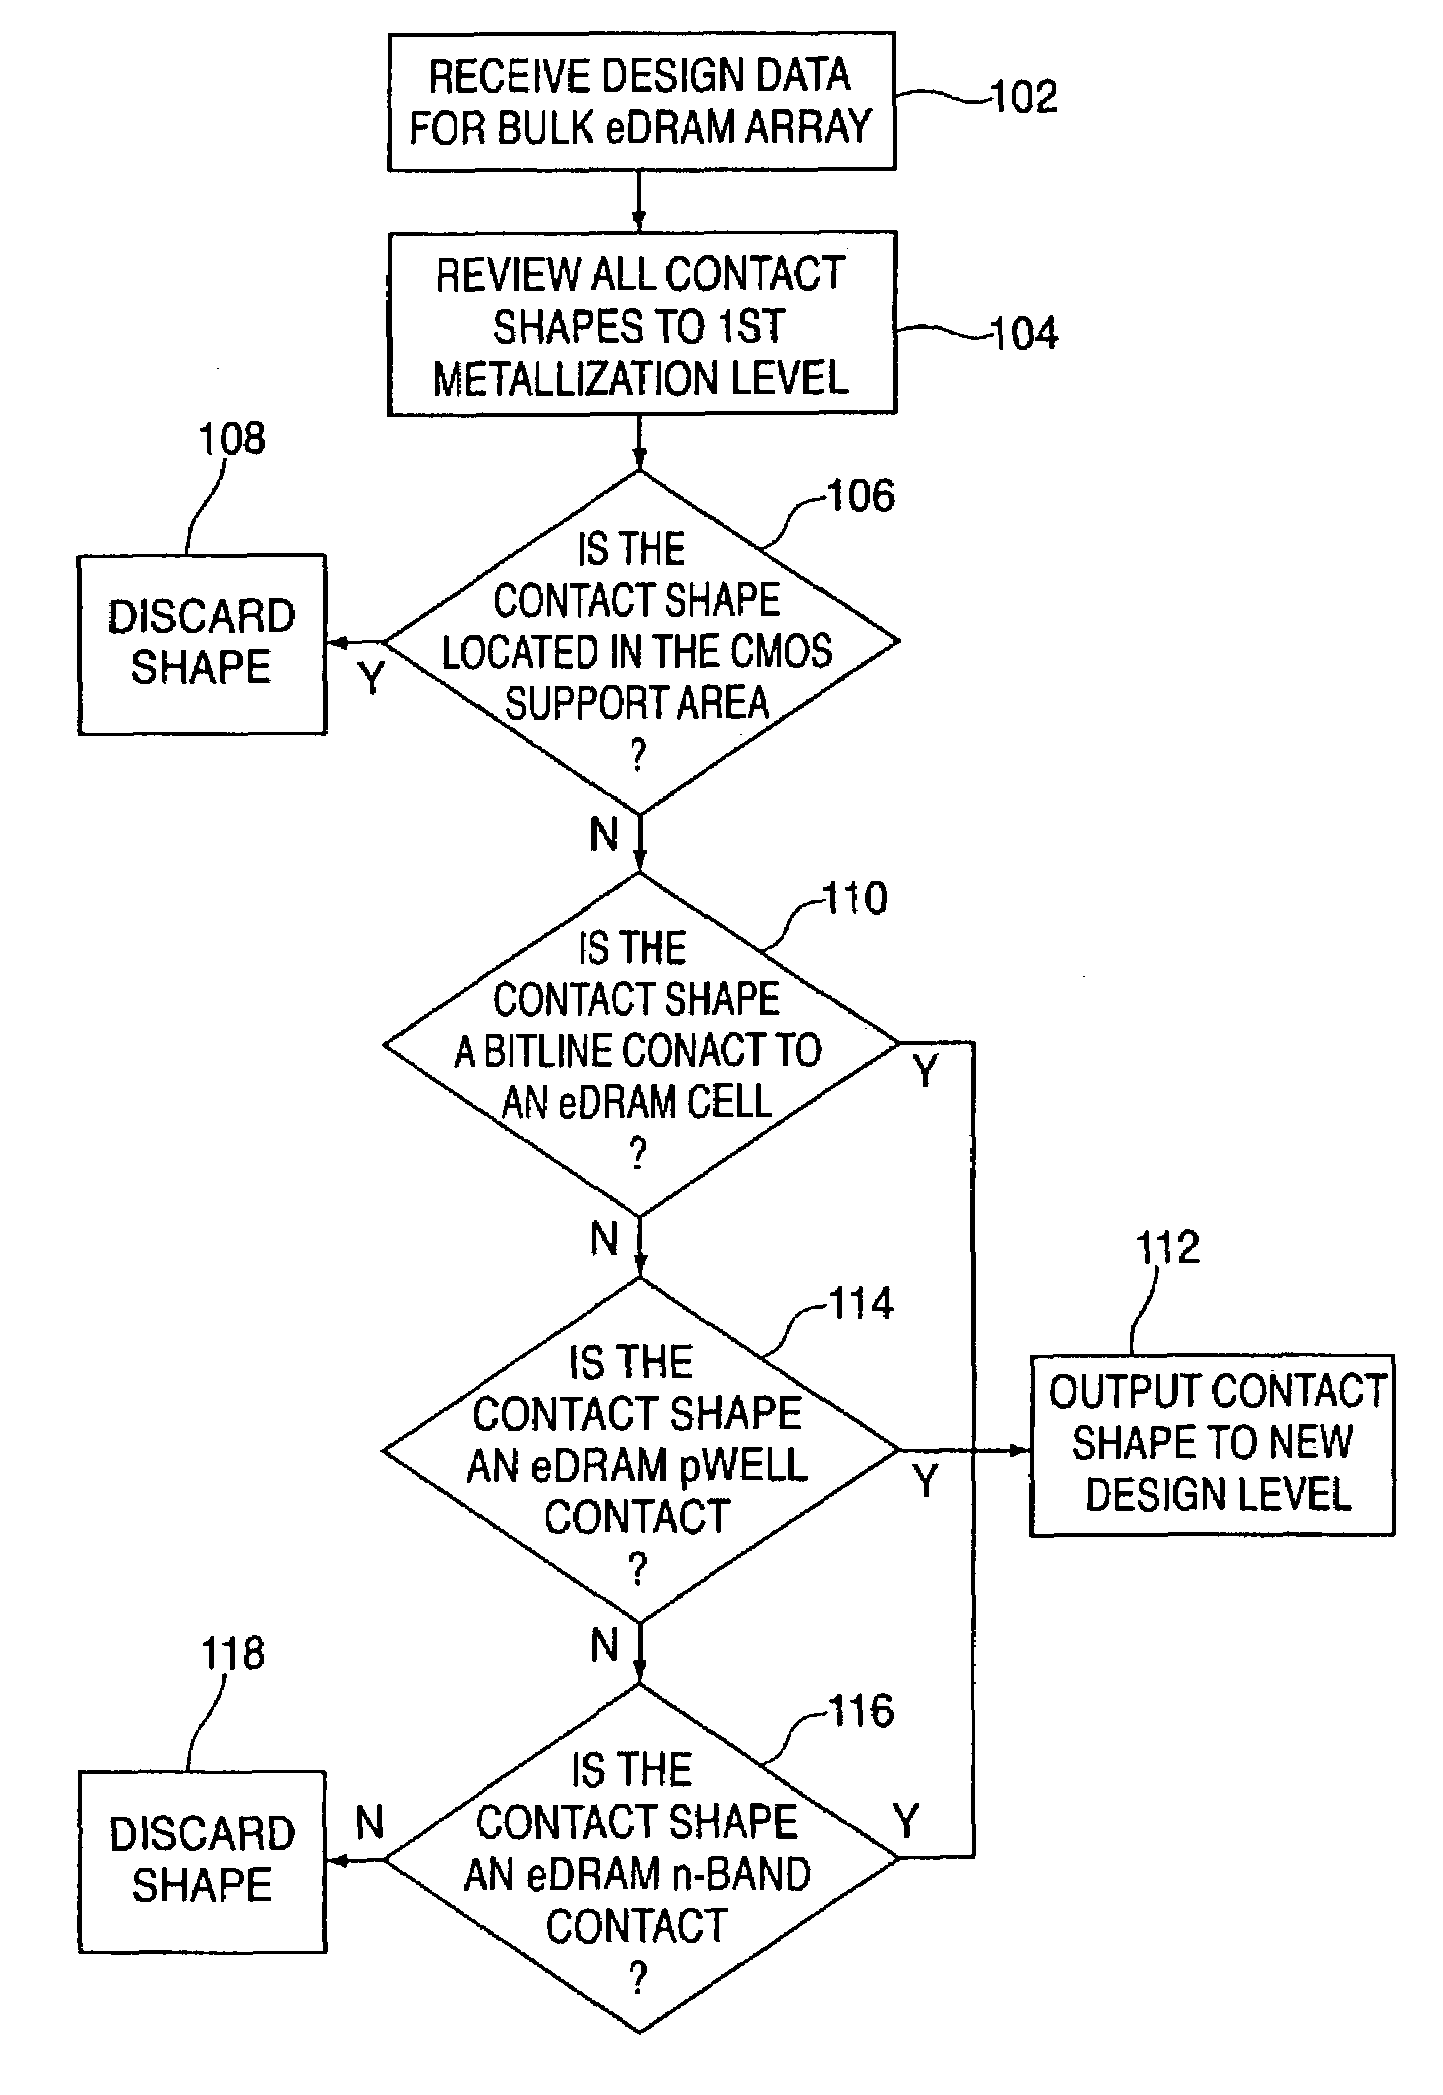 Method for determining cell body and biasing plate contact locations for embedded dram in SOI